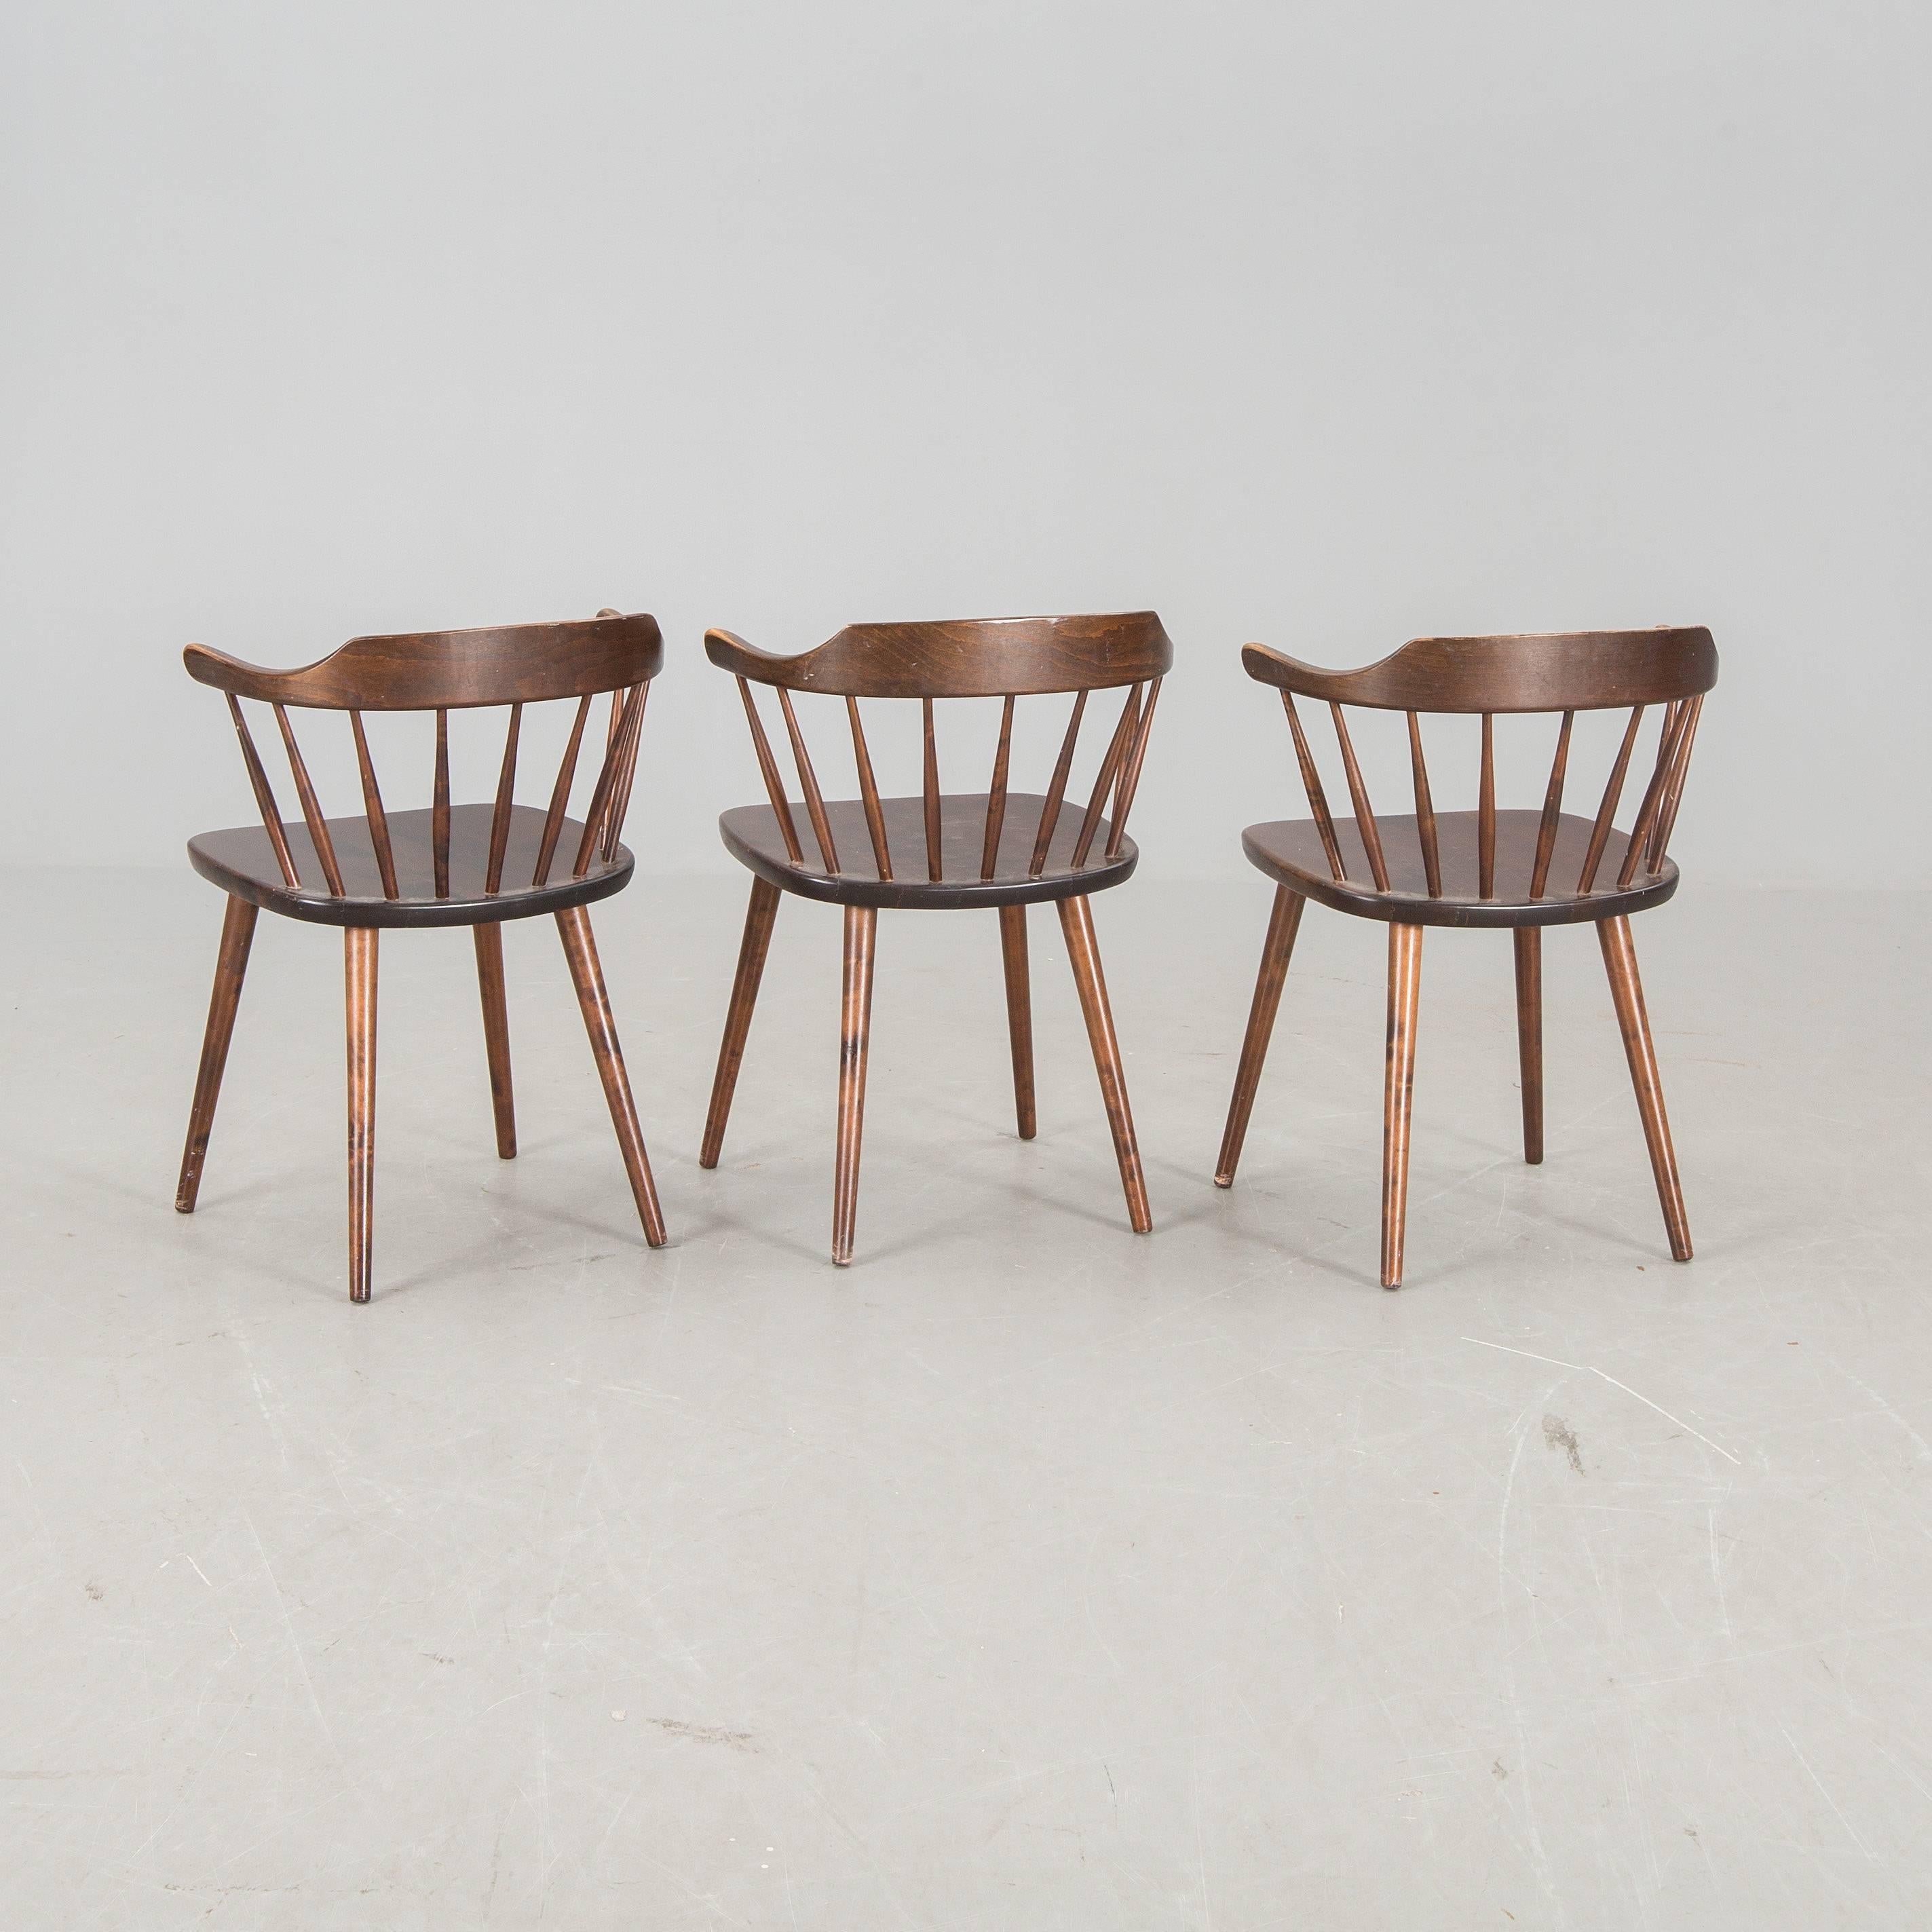 Chairs by Yngve Ekström with armrests. Wood.